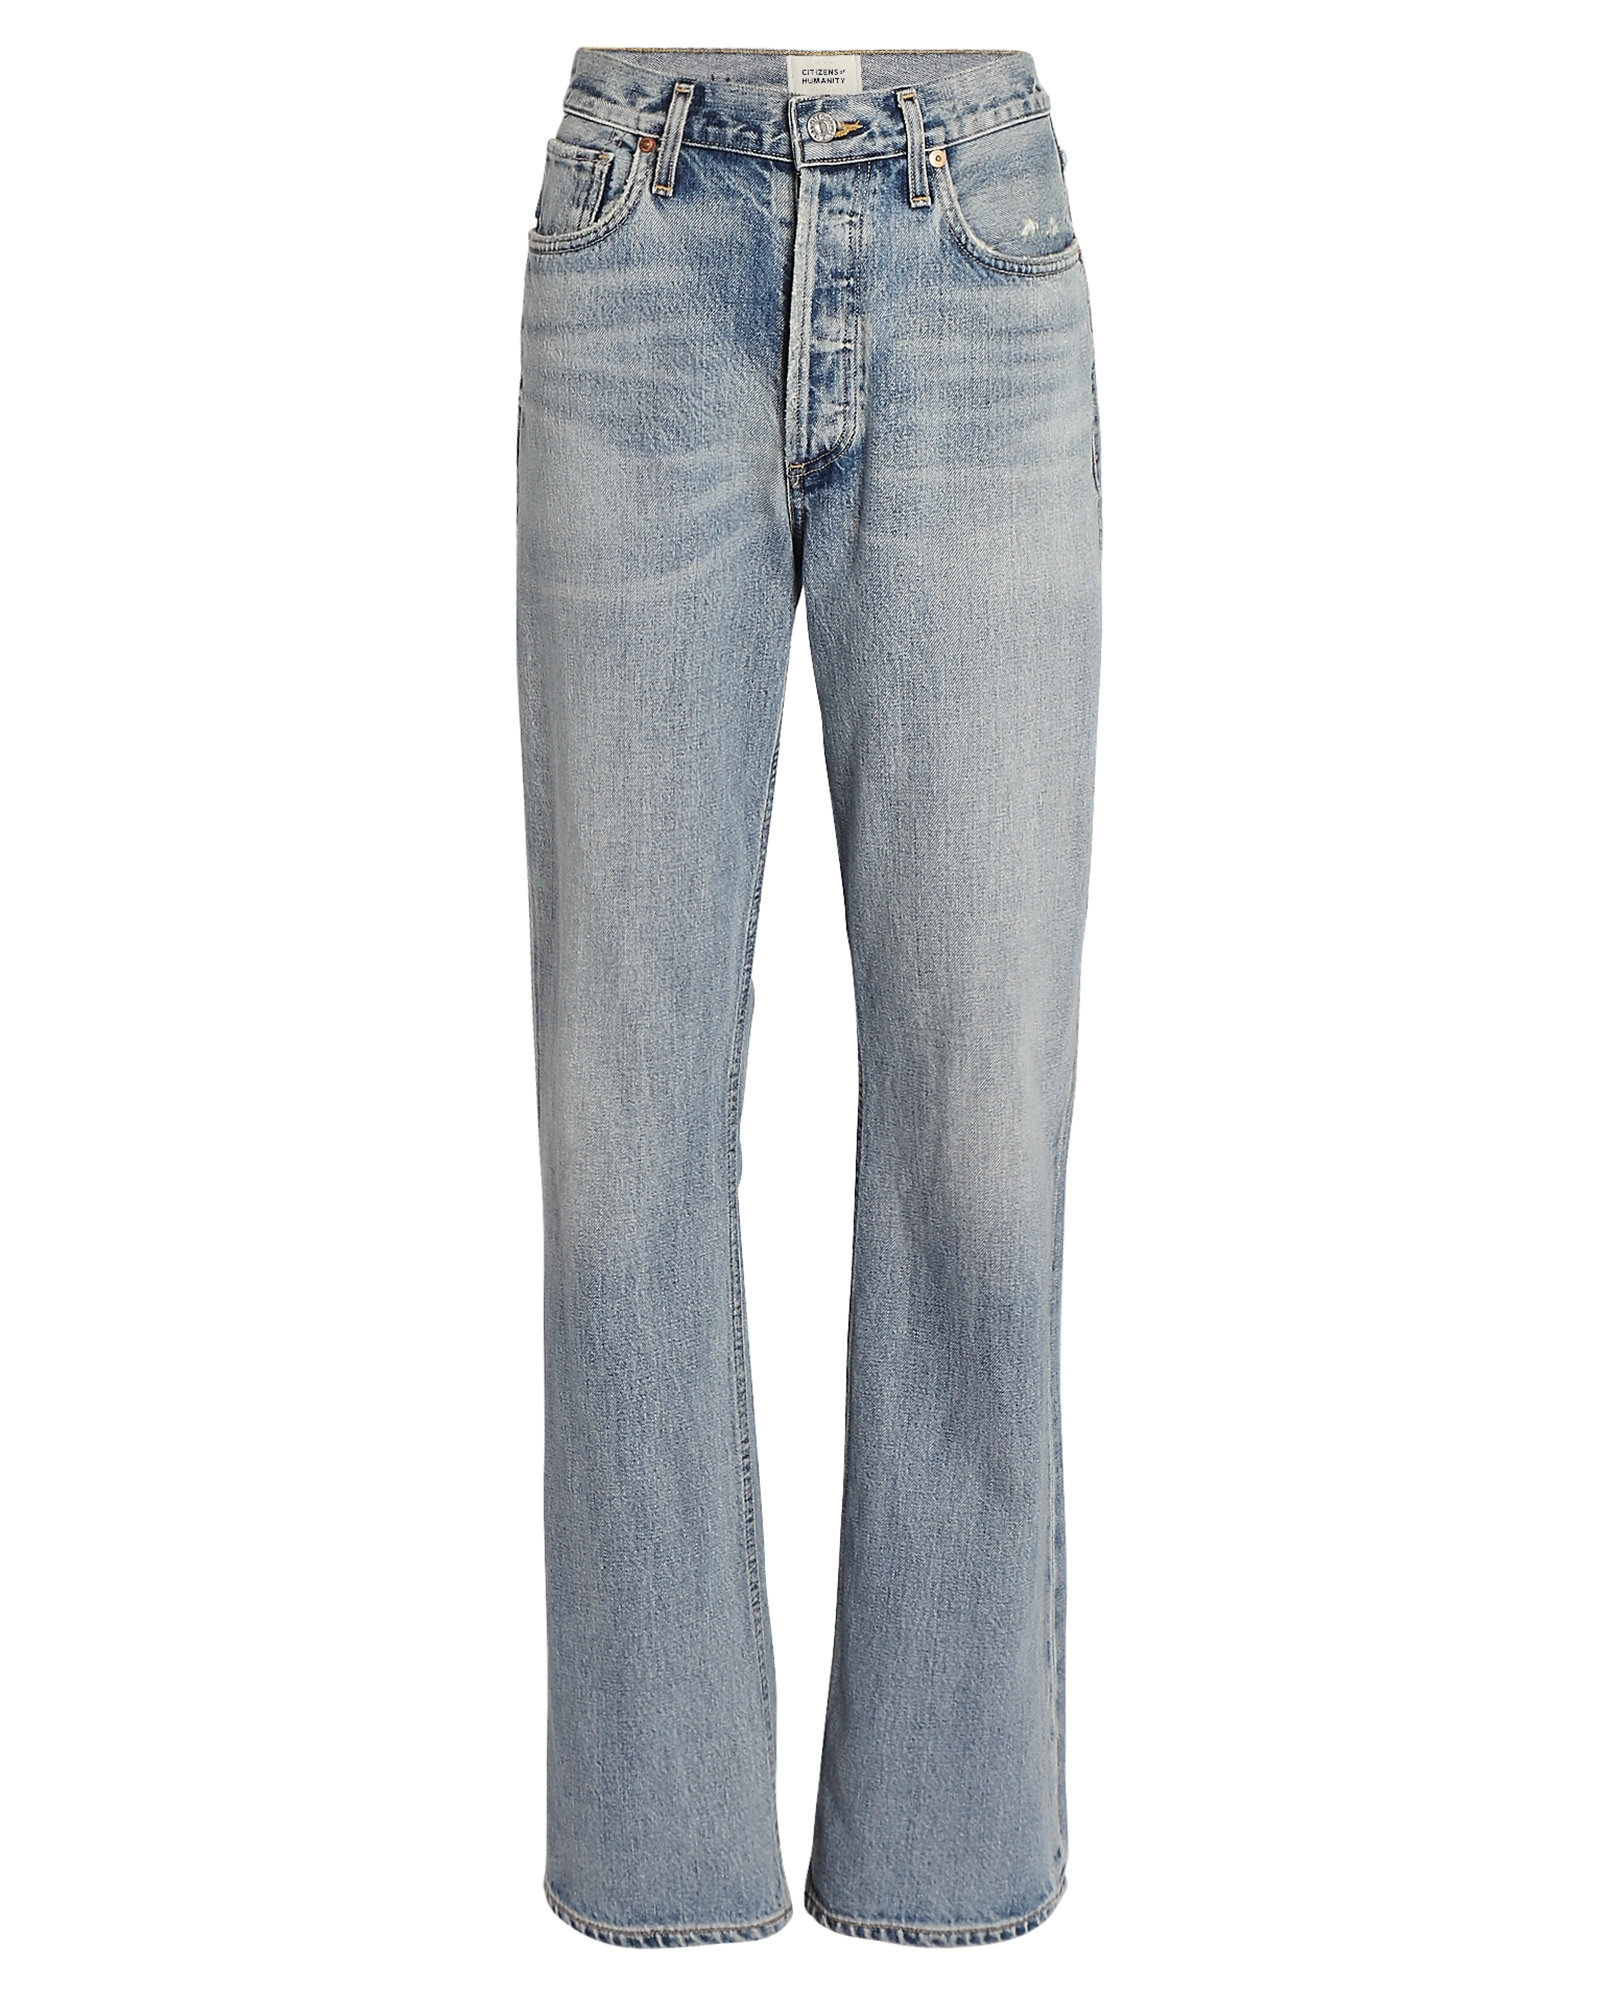 Citizens of Humanity Libby High-Rise Bootcut Jeans | INTERMIX®